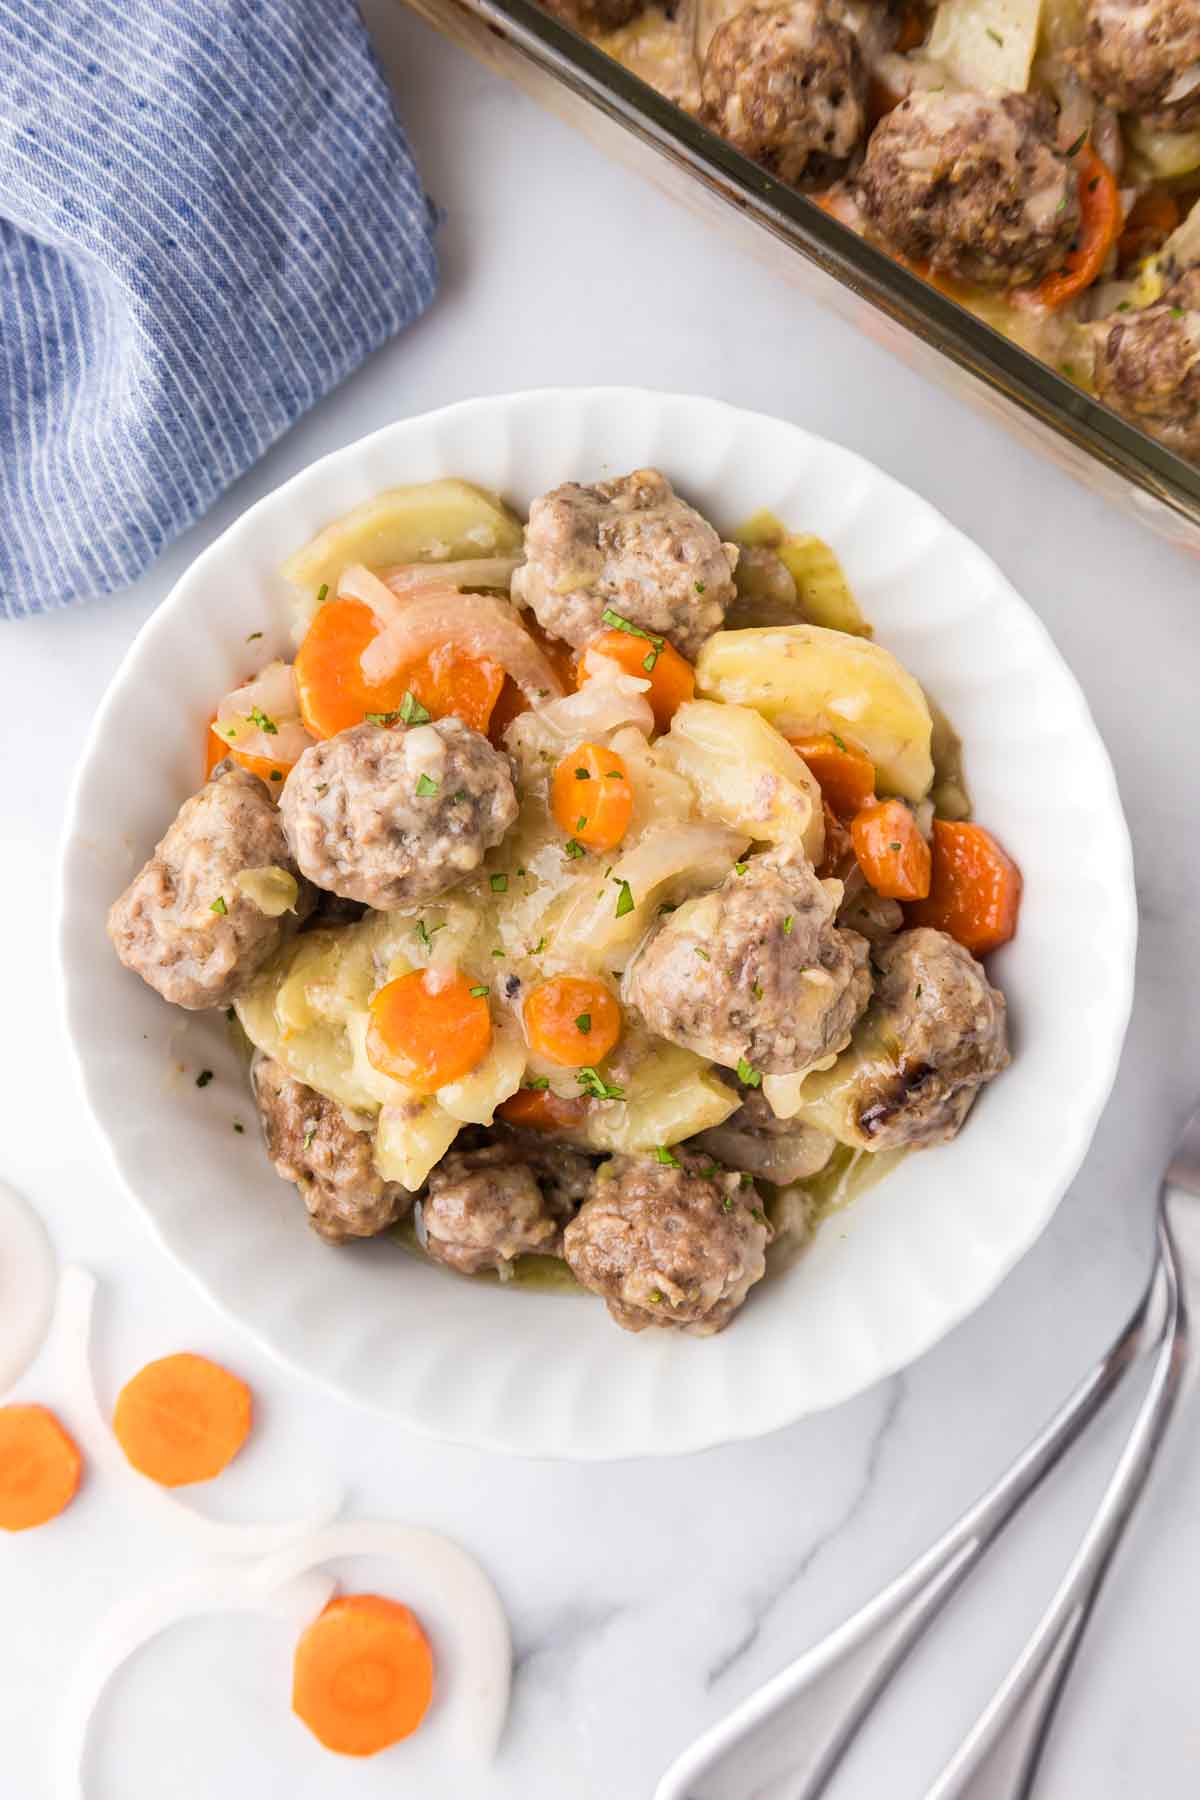 Hobo Meatball Casserole with Vegetables